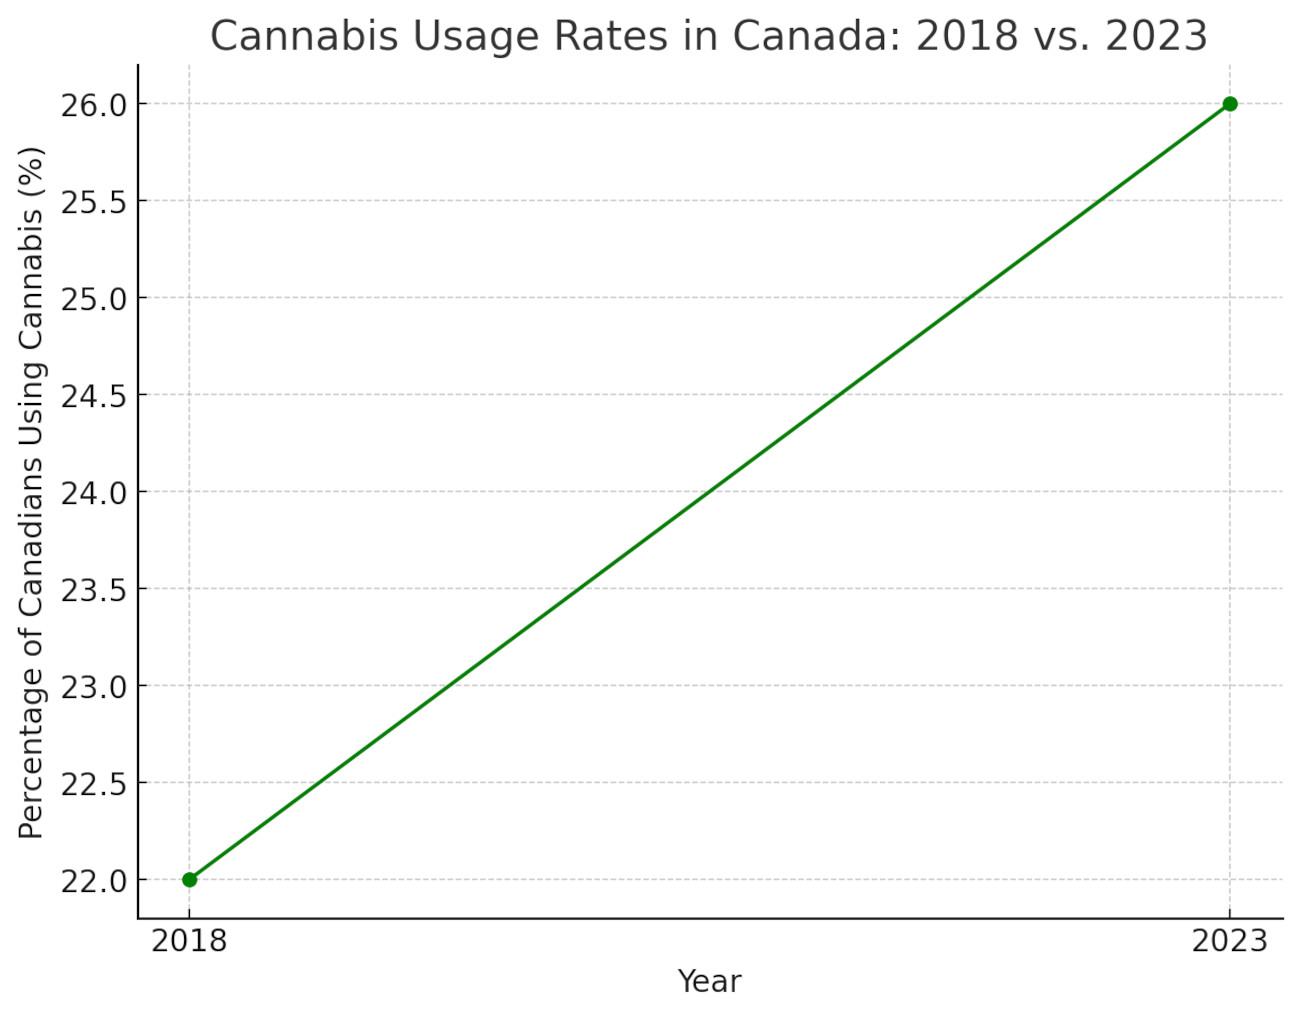 Cannabis Usage Rates in Canada: 2018 vs 2023